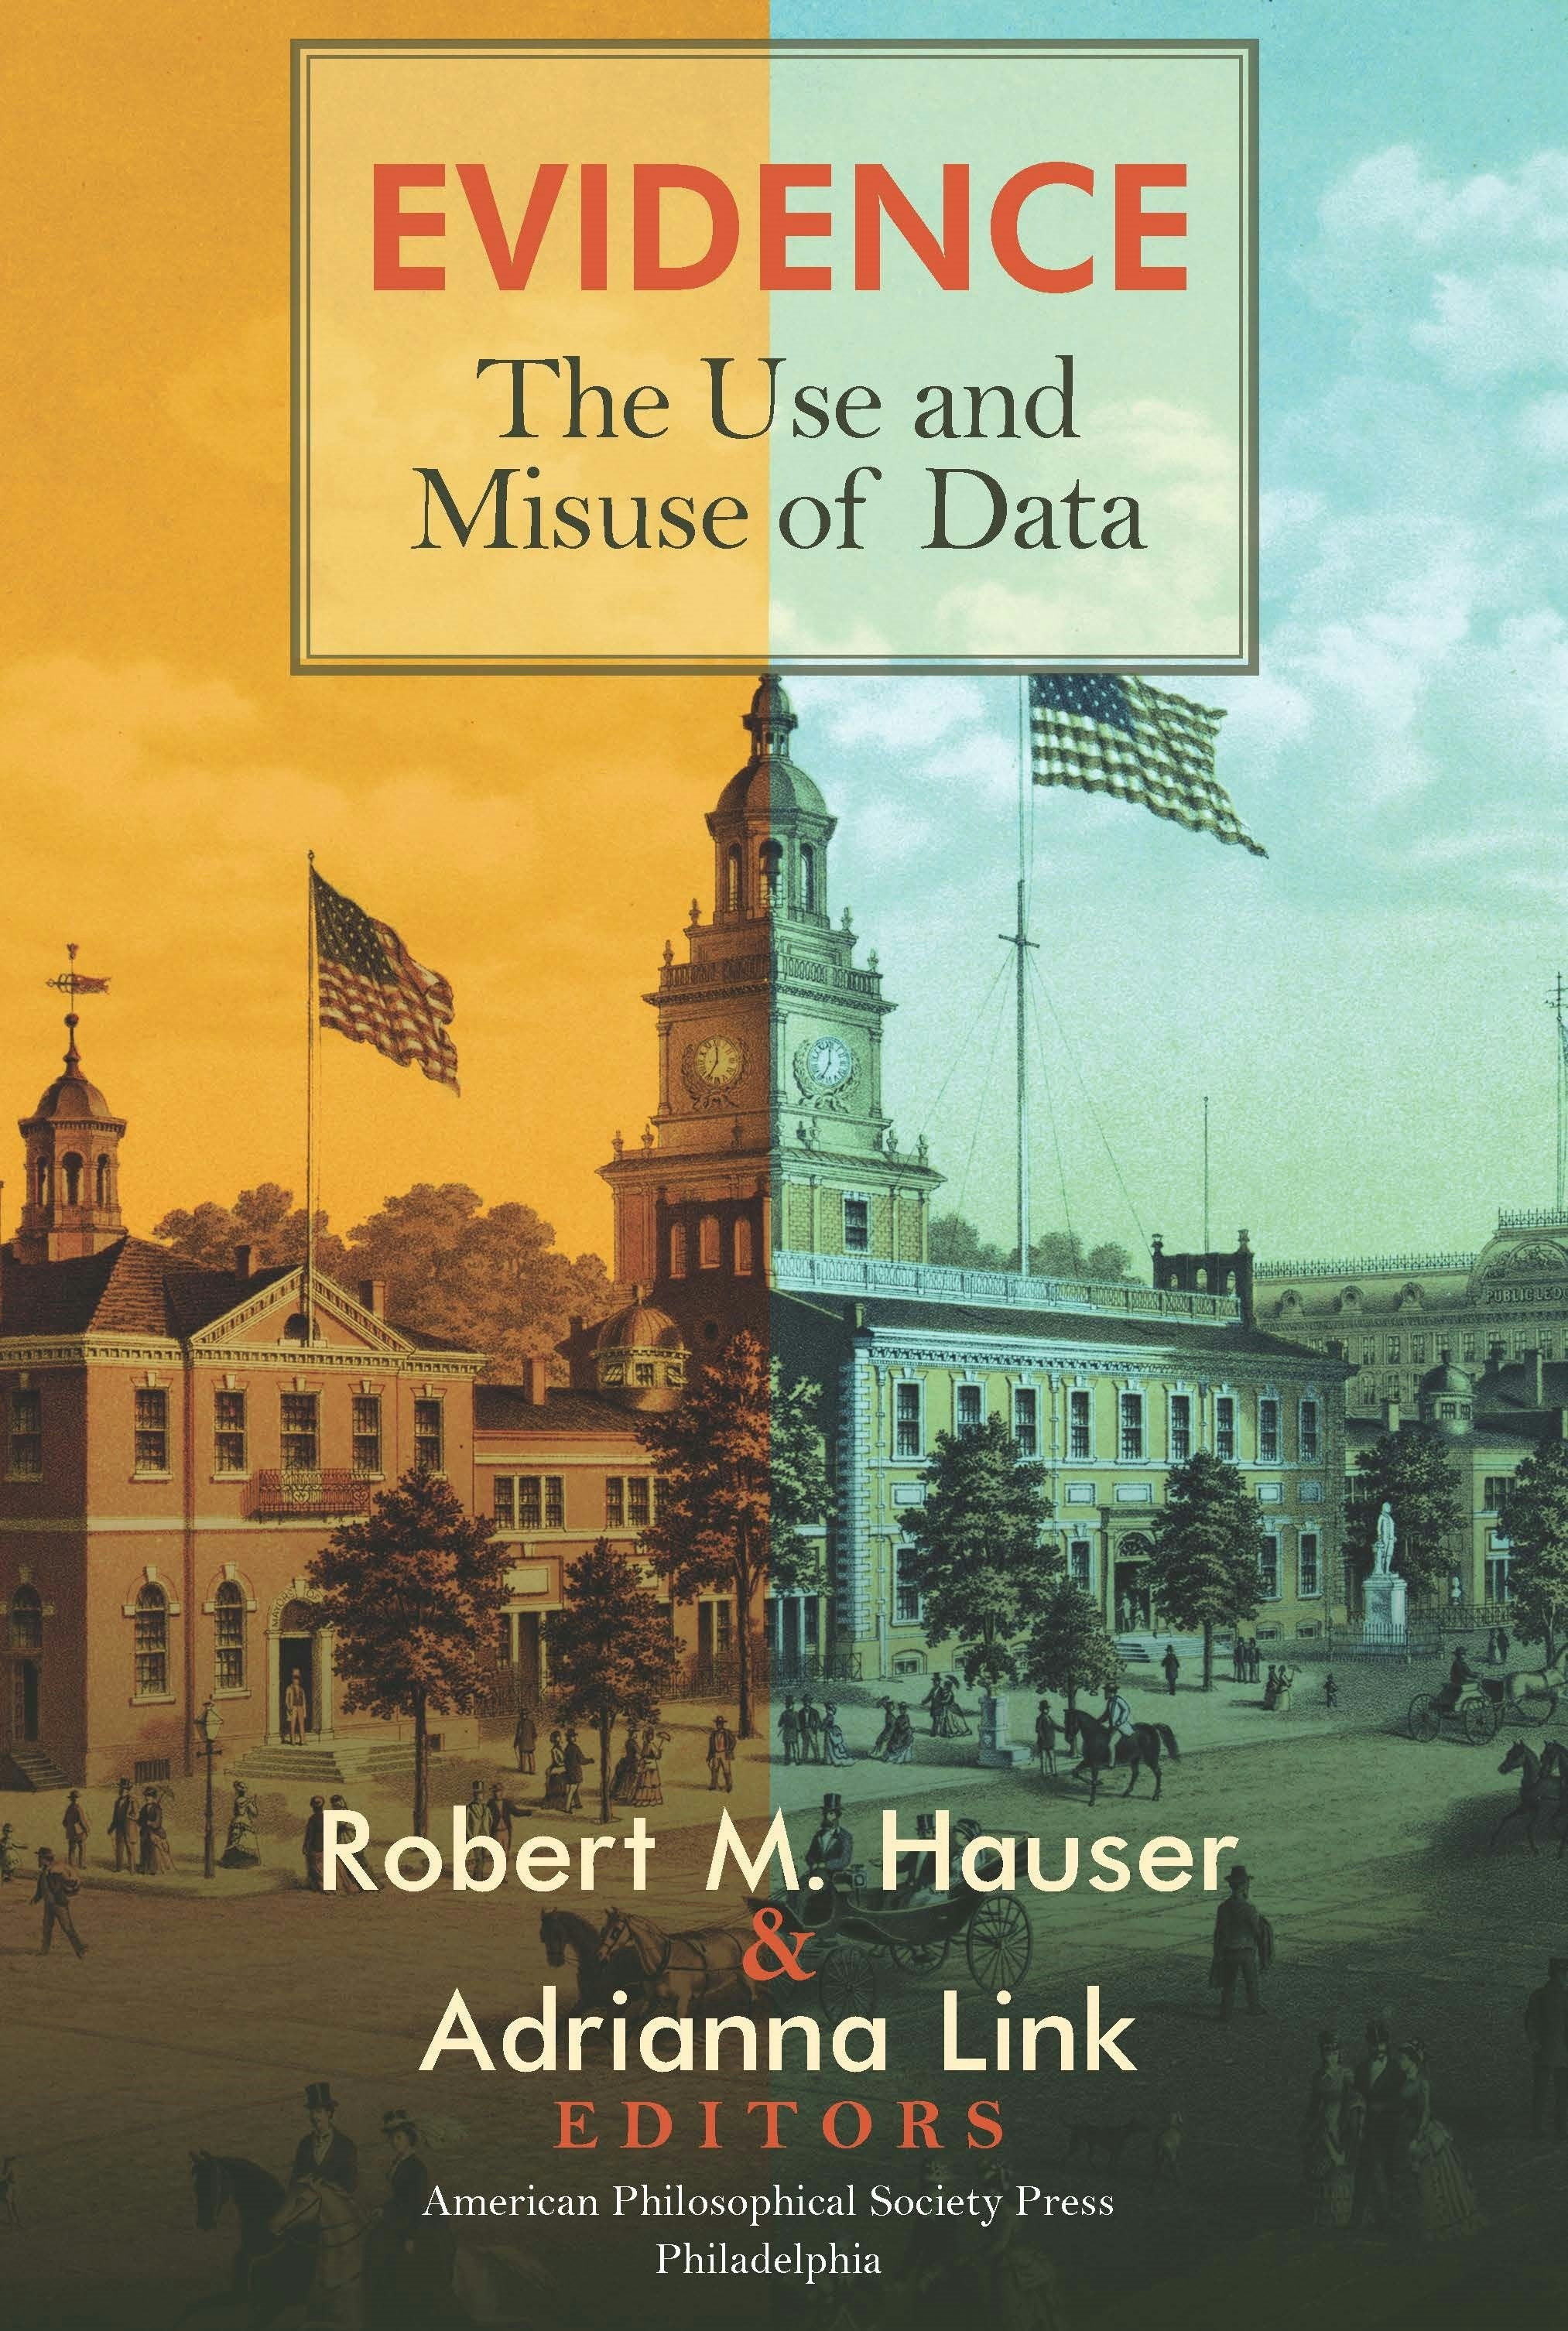 Cover Image of Evidence: The Use and Misuse of Data